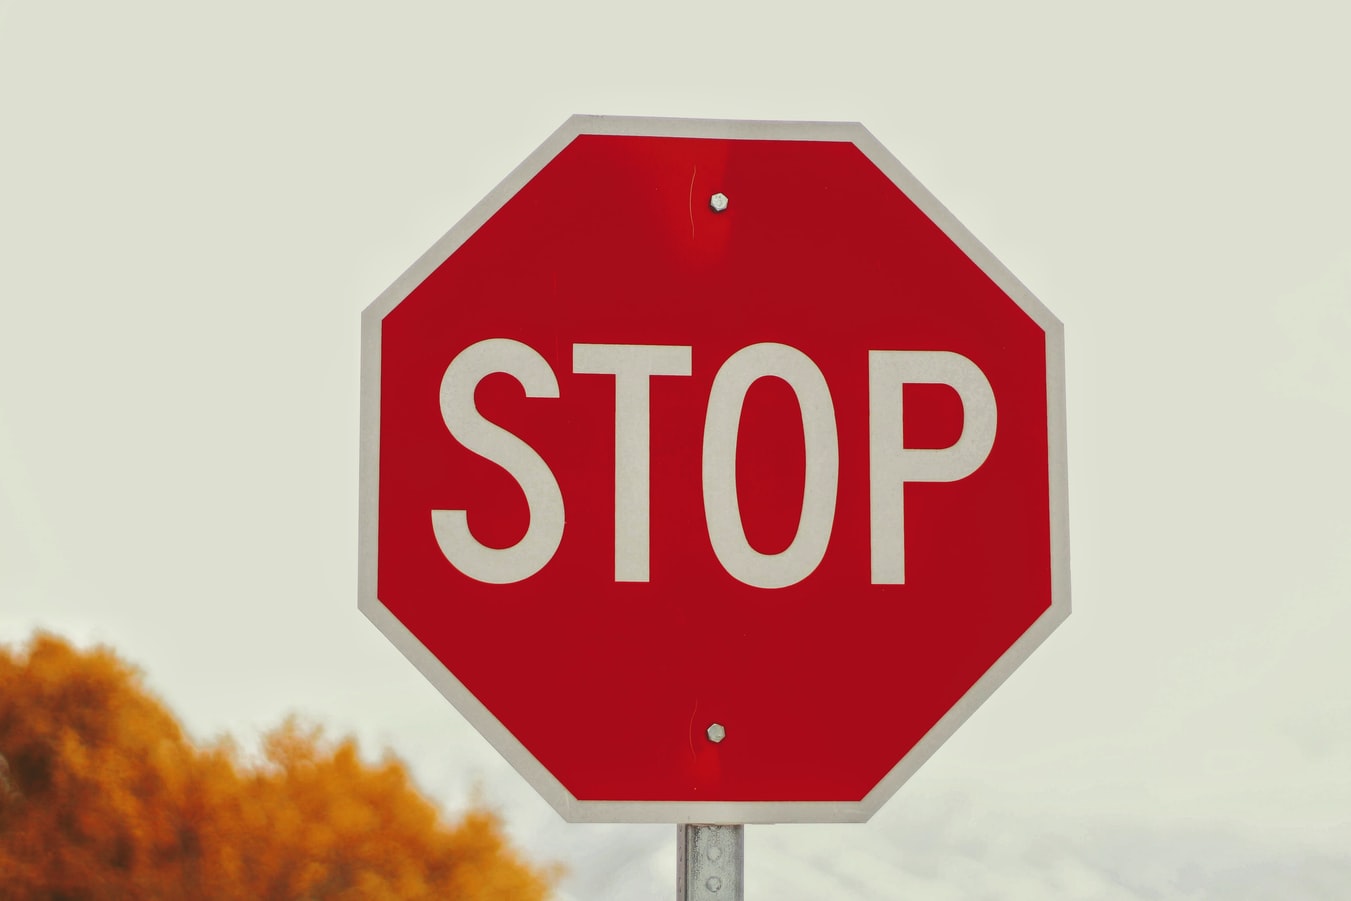 A stop sign. Many individuals are realizing how dangerous fentanyl is and how the spread needs to stop.